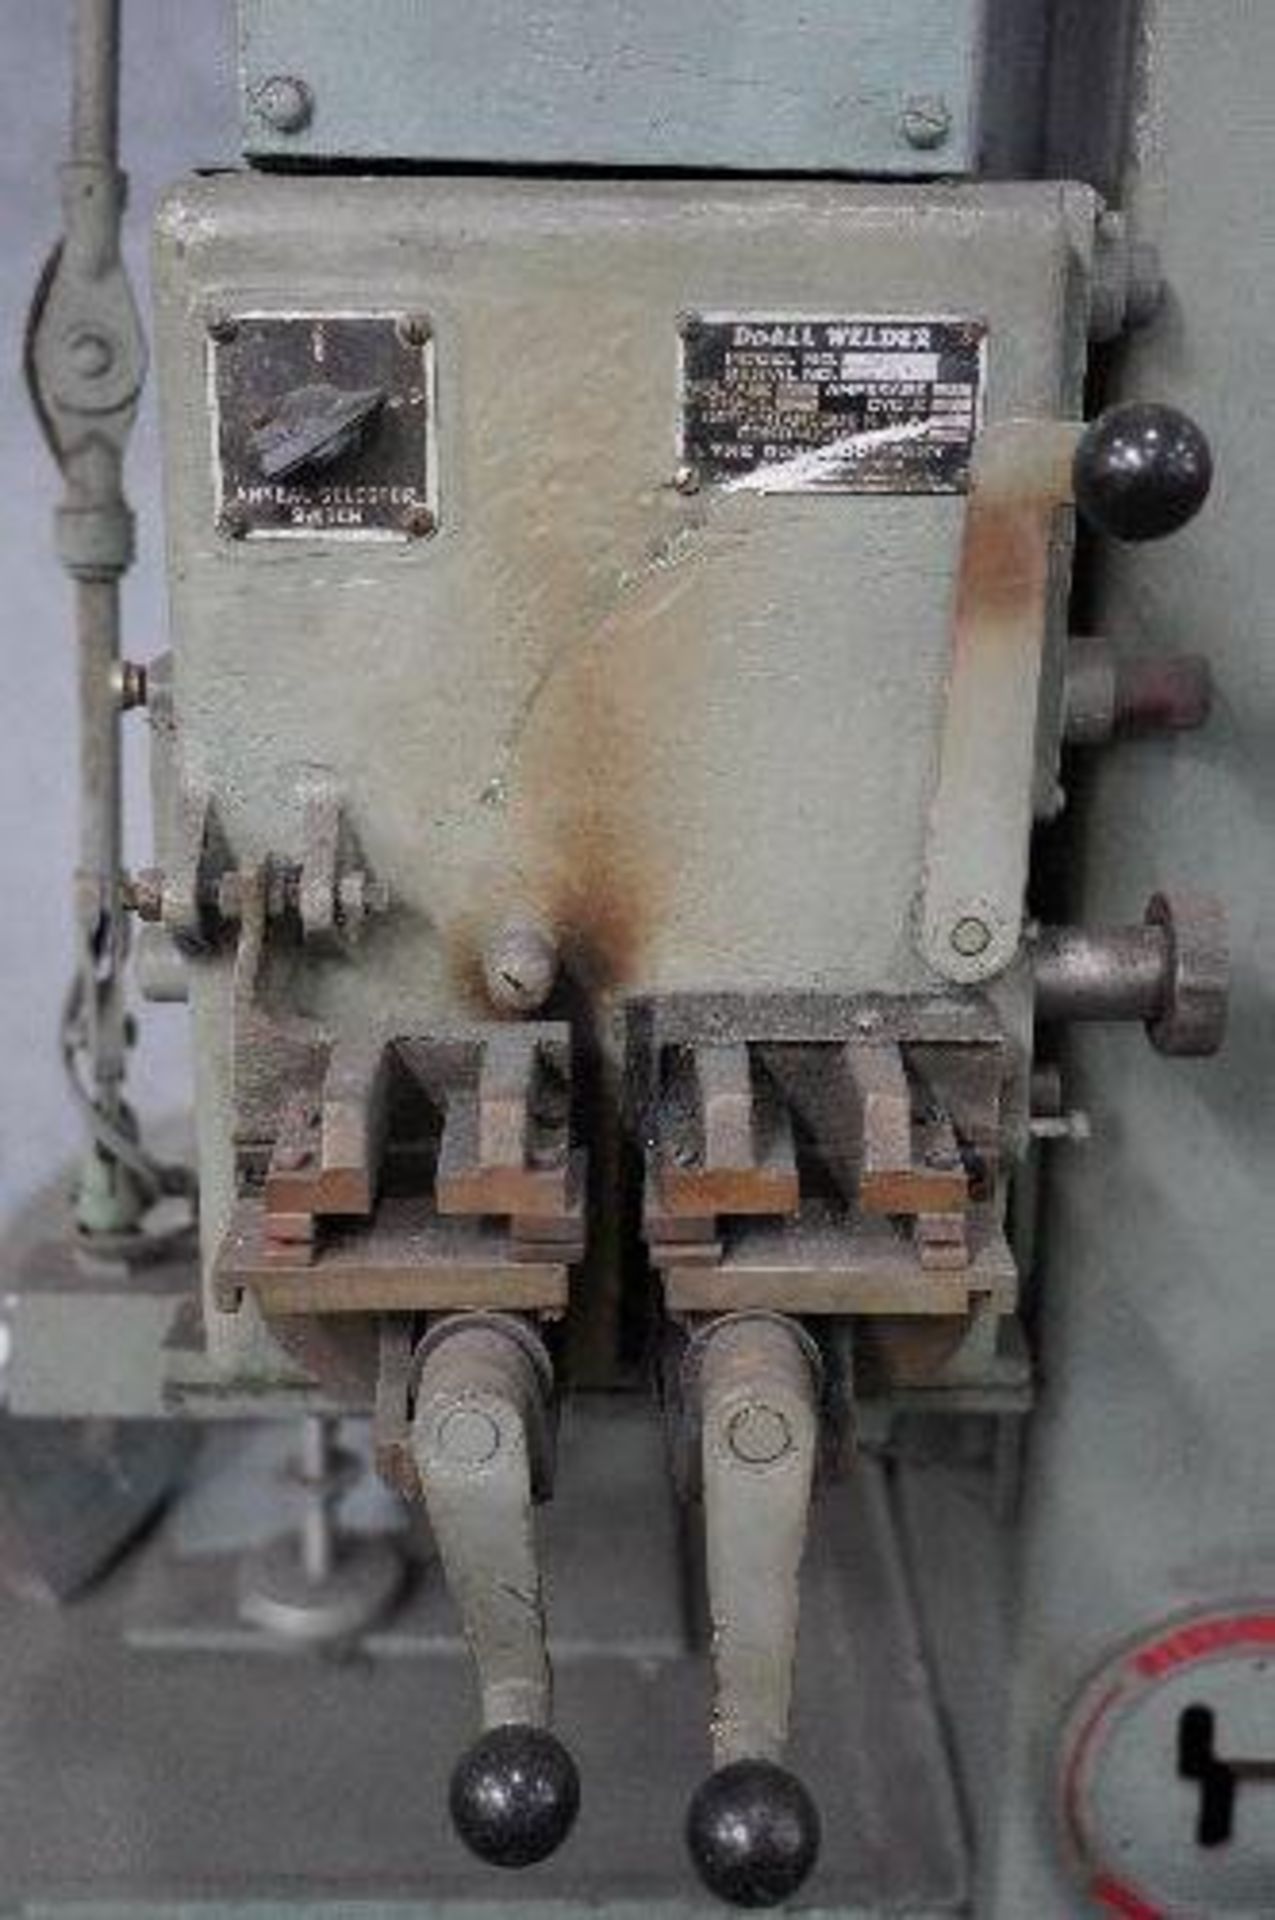 DoAll Vertical Band Saw - Image 21 of 26